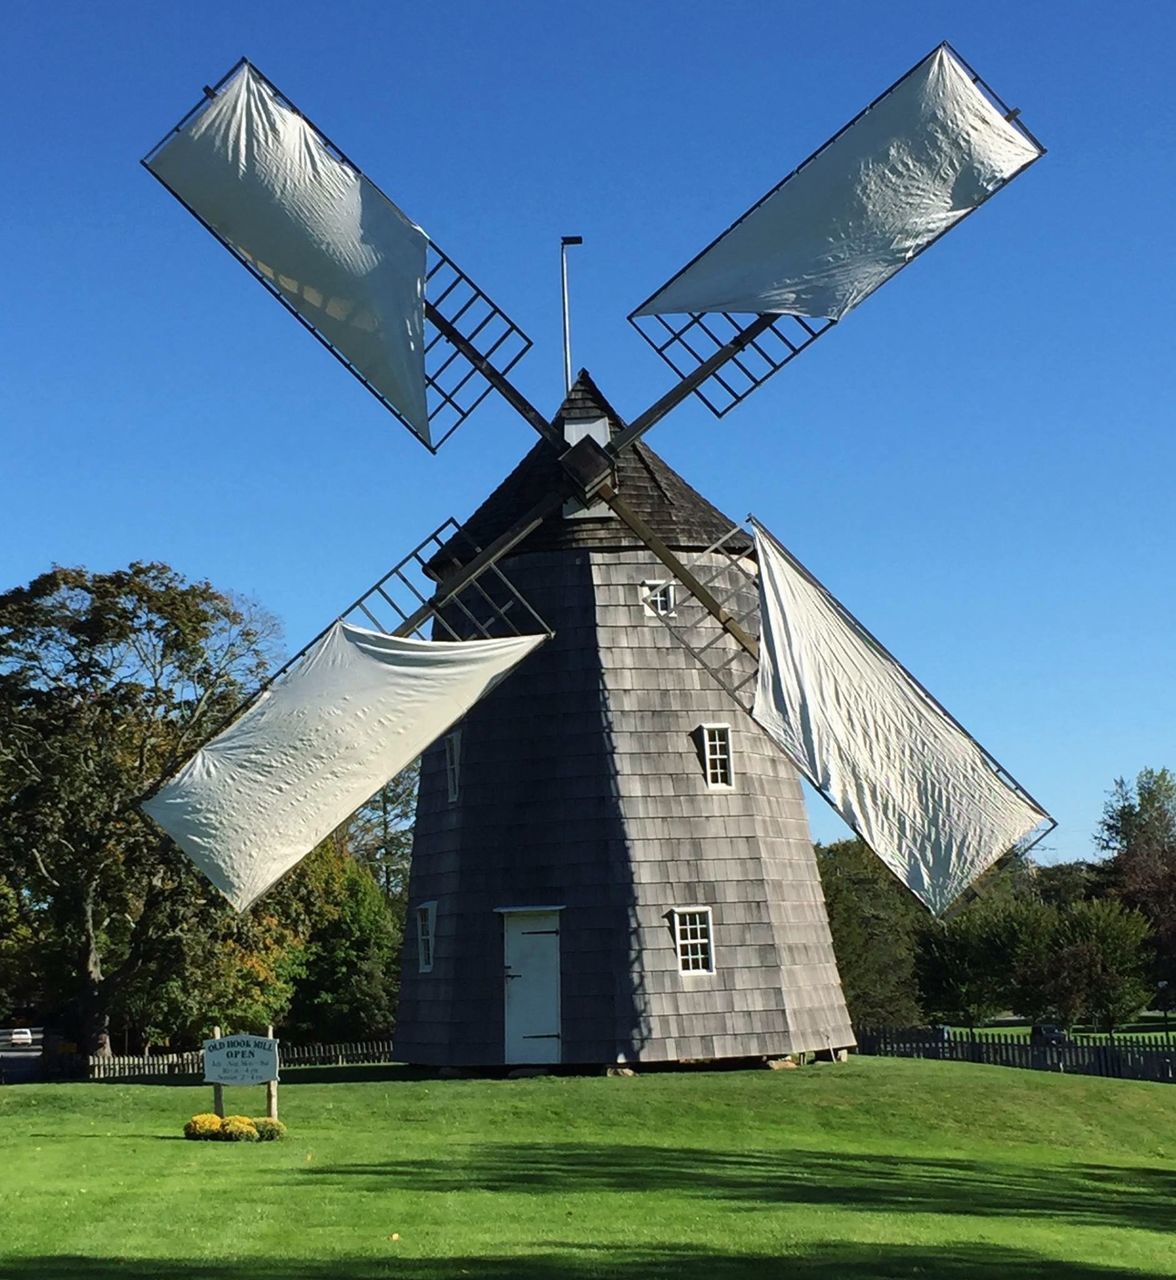 building exterior, architecture, built structure, grass, low angle view, wind power, alternative energy, clear sky, renewable energy, windmill, environmental conservation, sky, blue, traditional windmill, tree, tower, religion, sunlight, field, patriotism